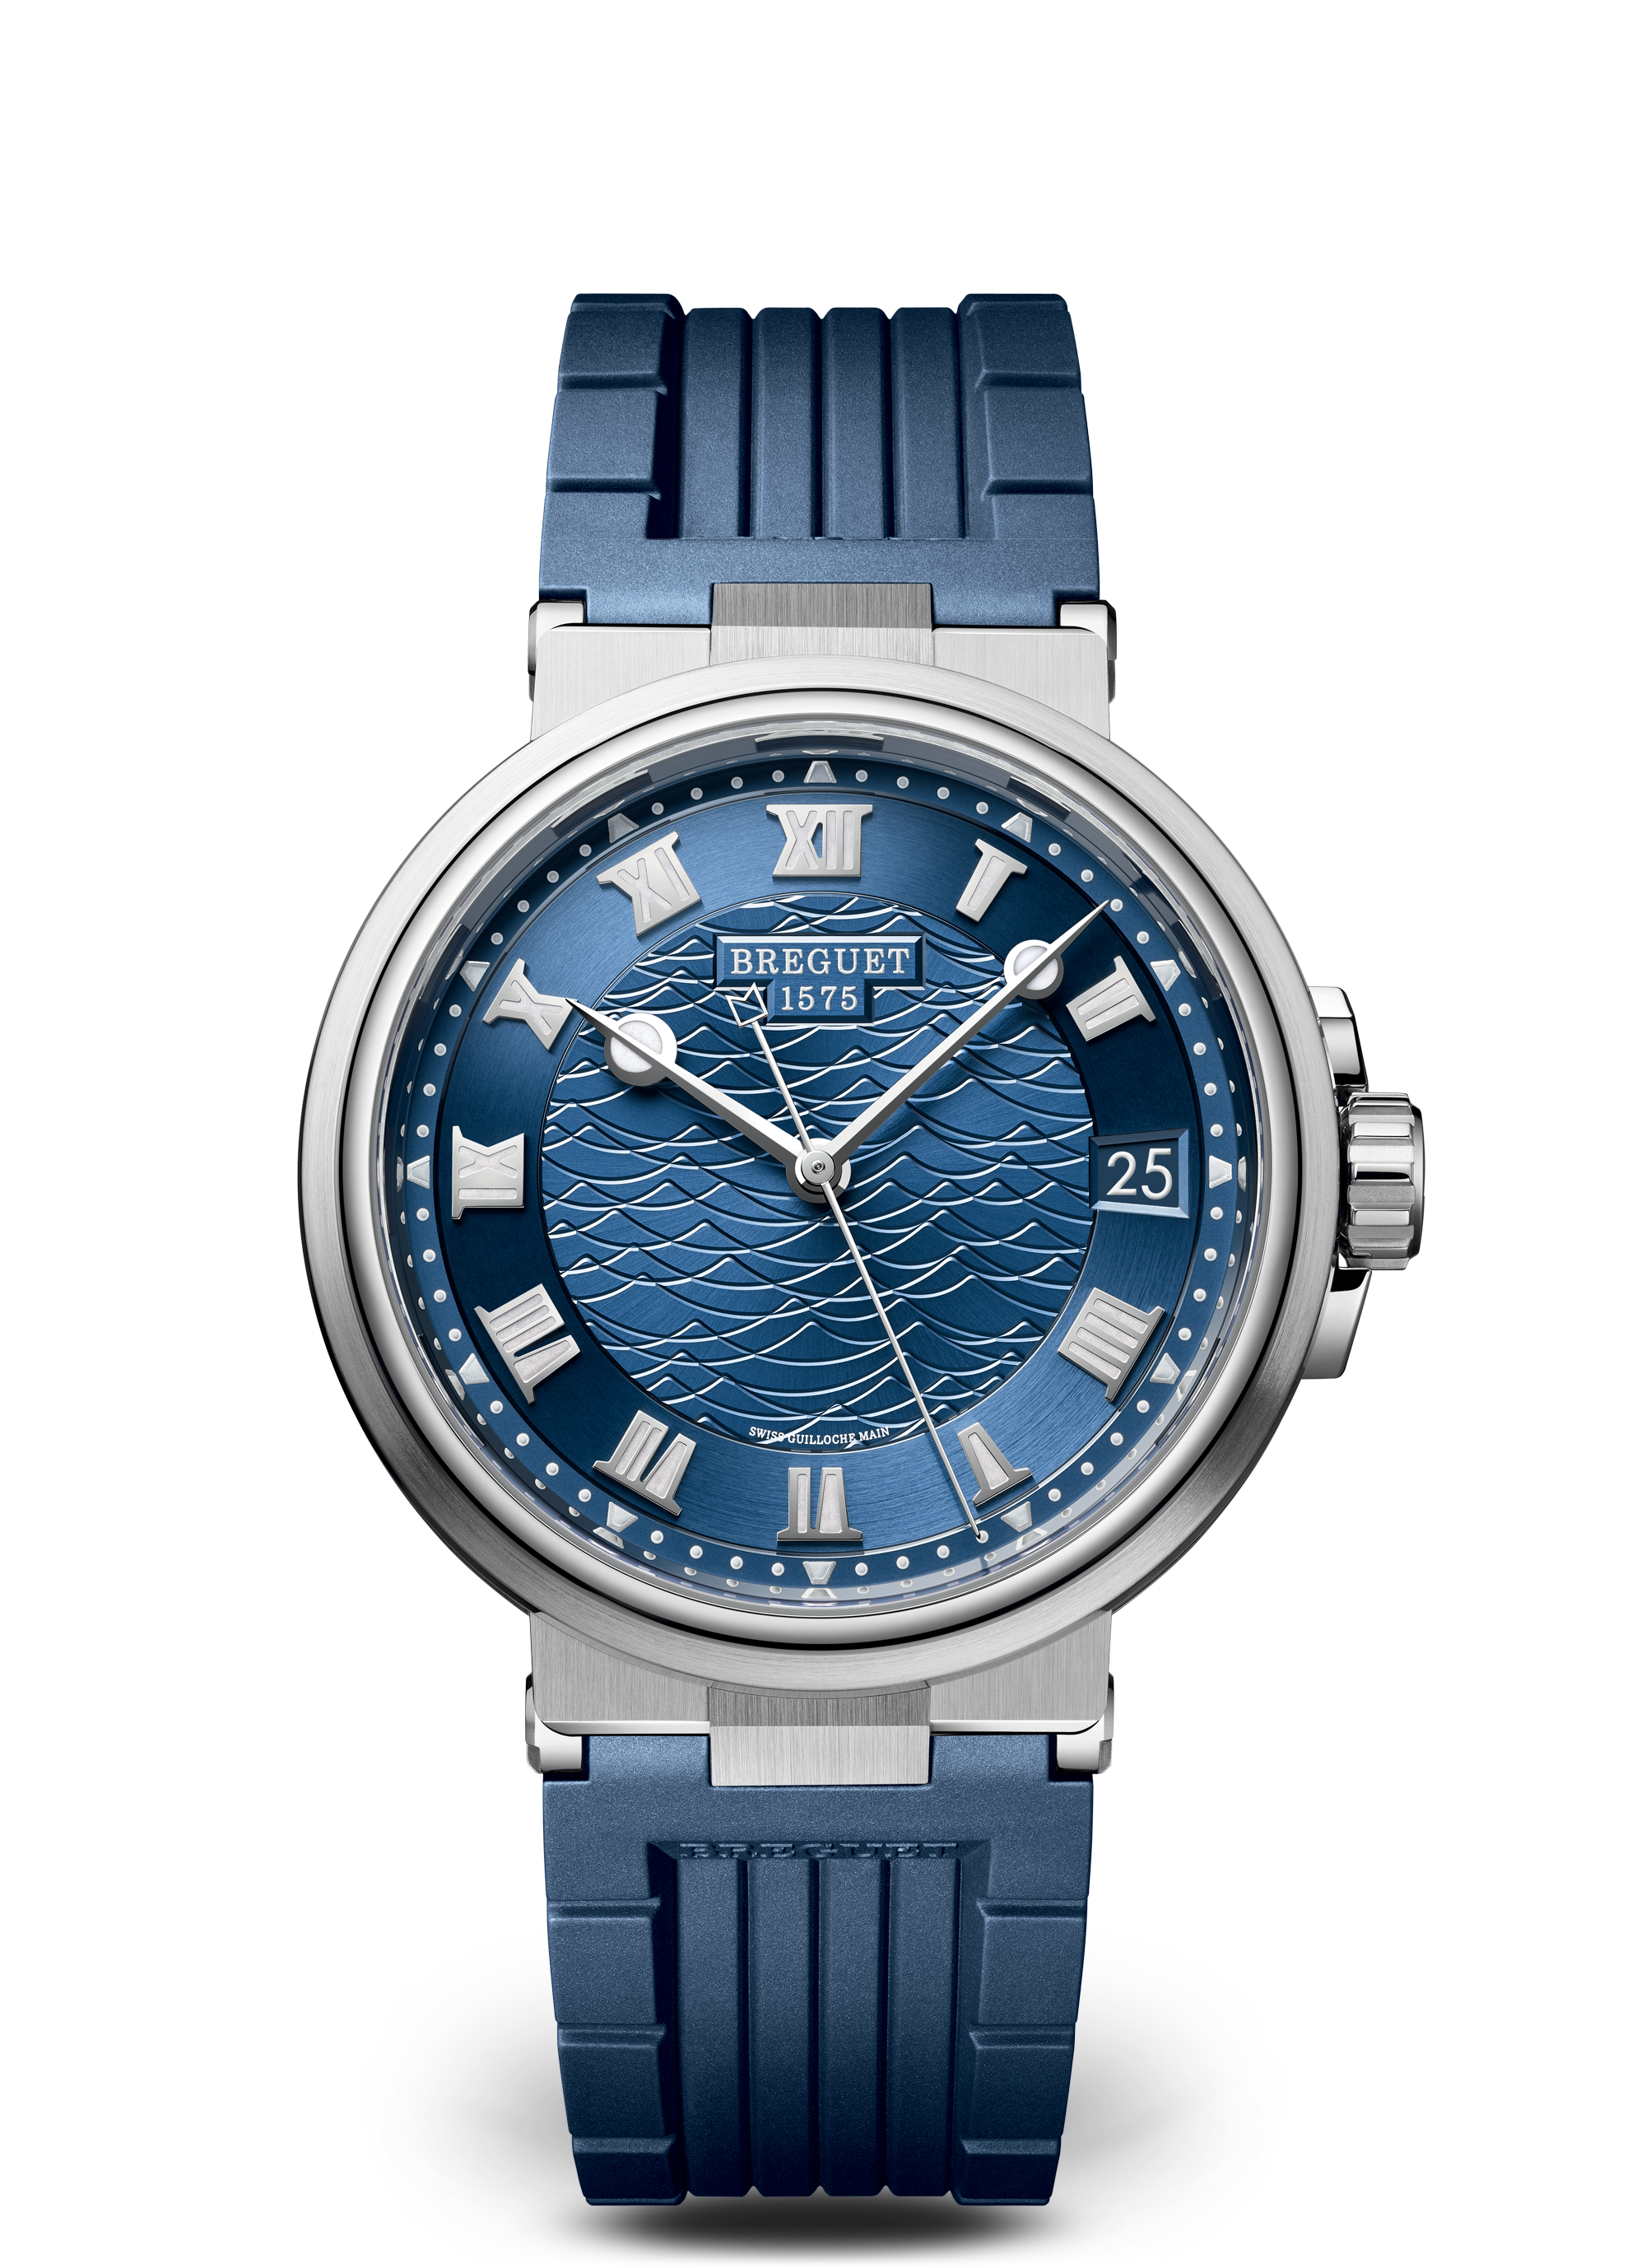 Replica Christopher Ward Watches